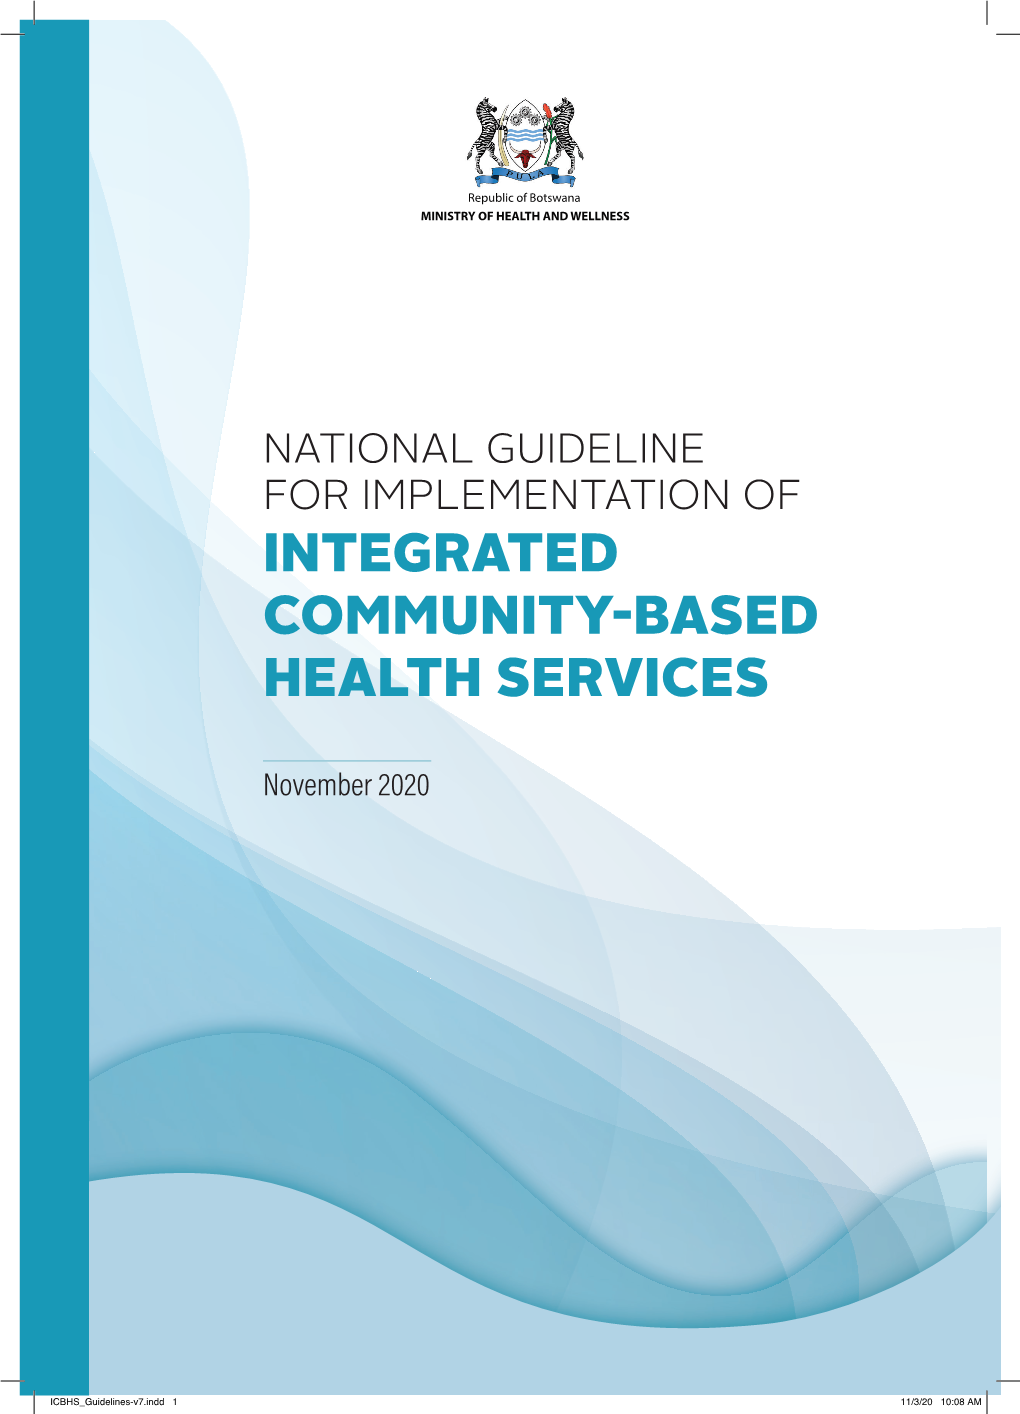 National Guidelines for Implementation of Integrated